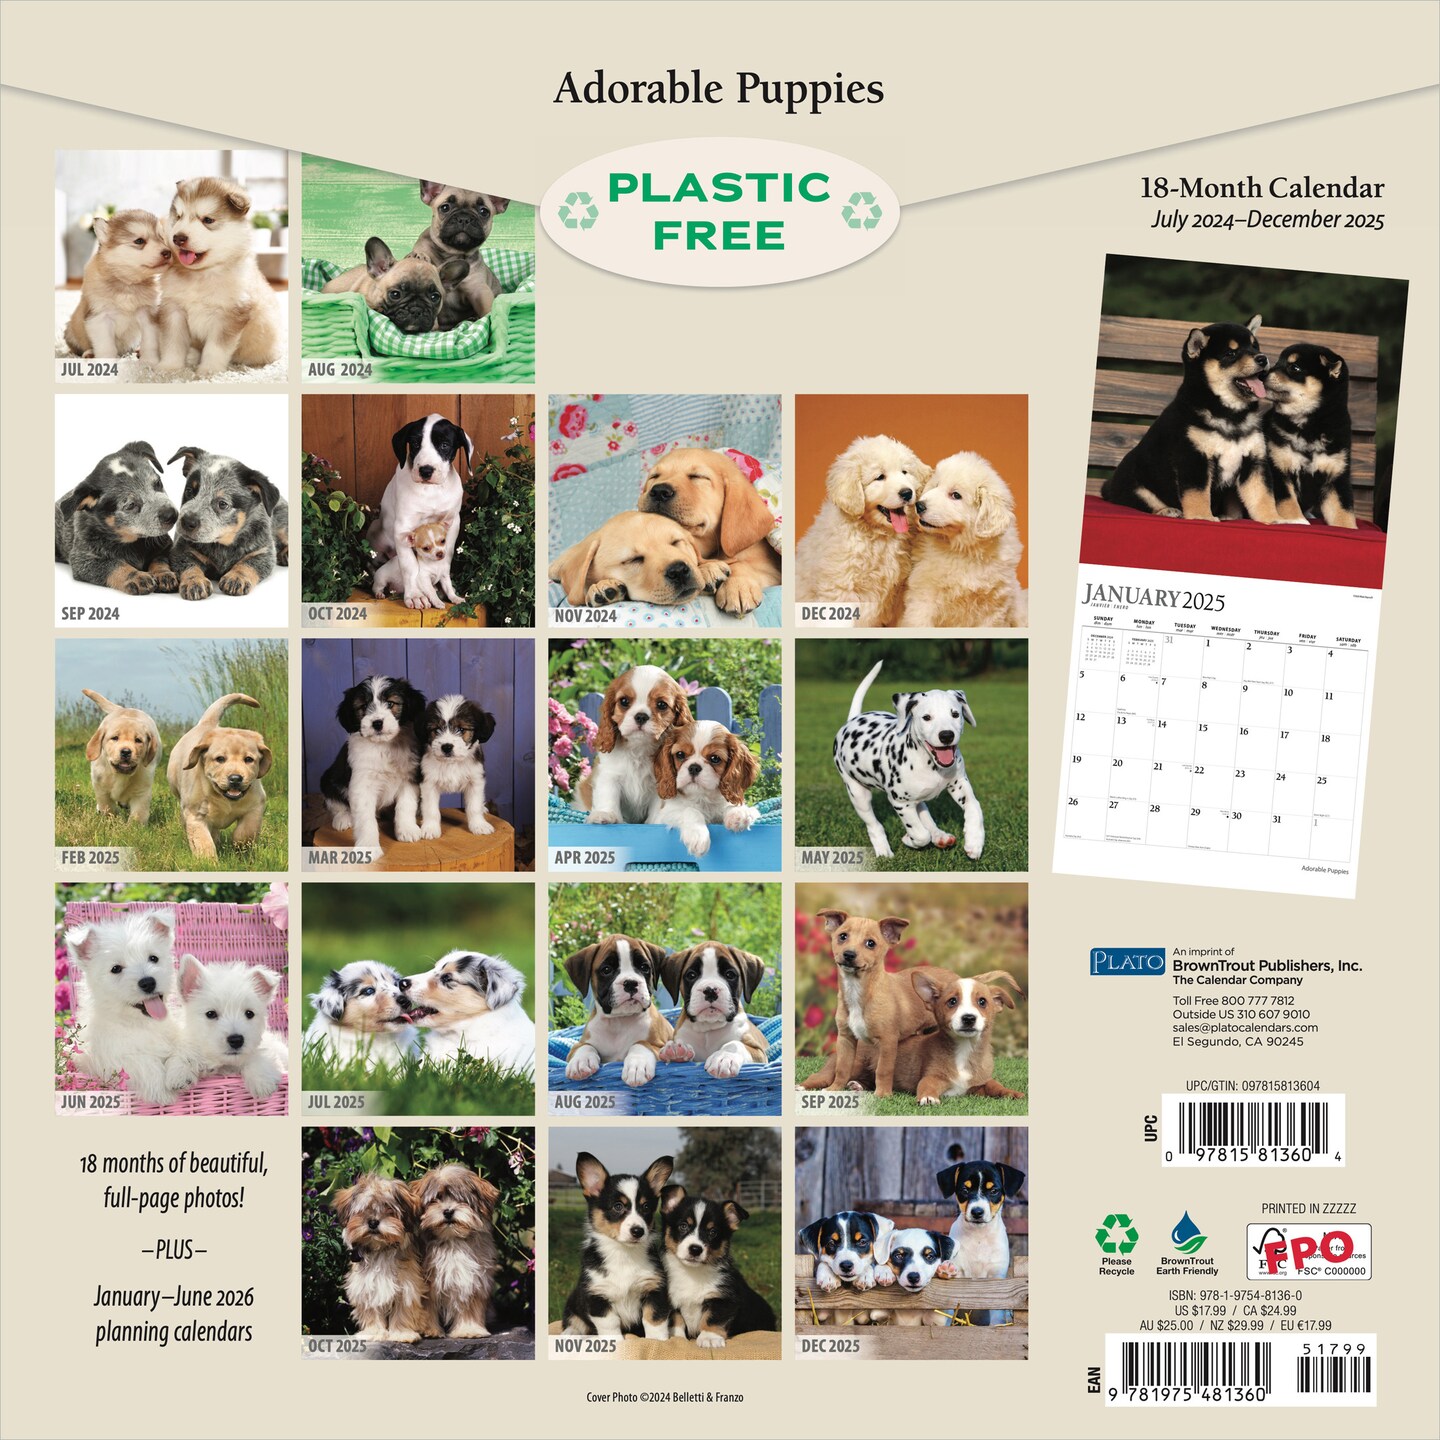 Adorable Puppies | 2025 12 x 24 Inch 18 Months Monthly Square Wall Calendar | July 2024 - December 2025 | Plastic-Free | Plato | Animals Dog Breeds Pets